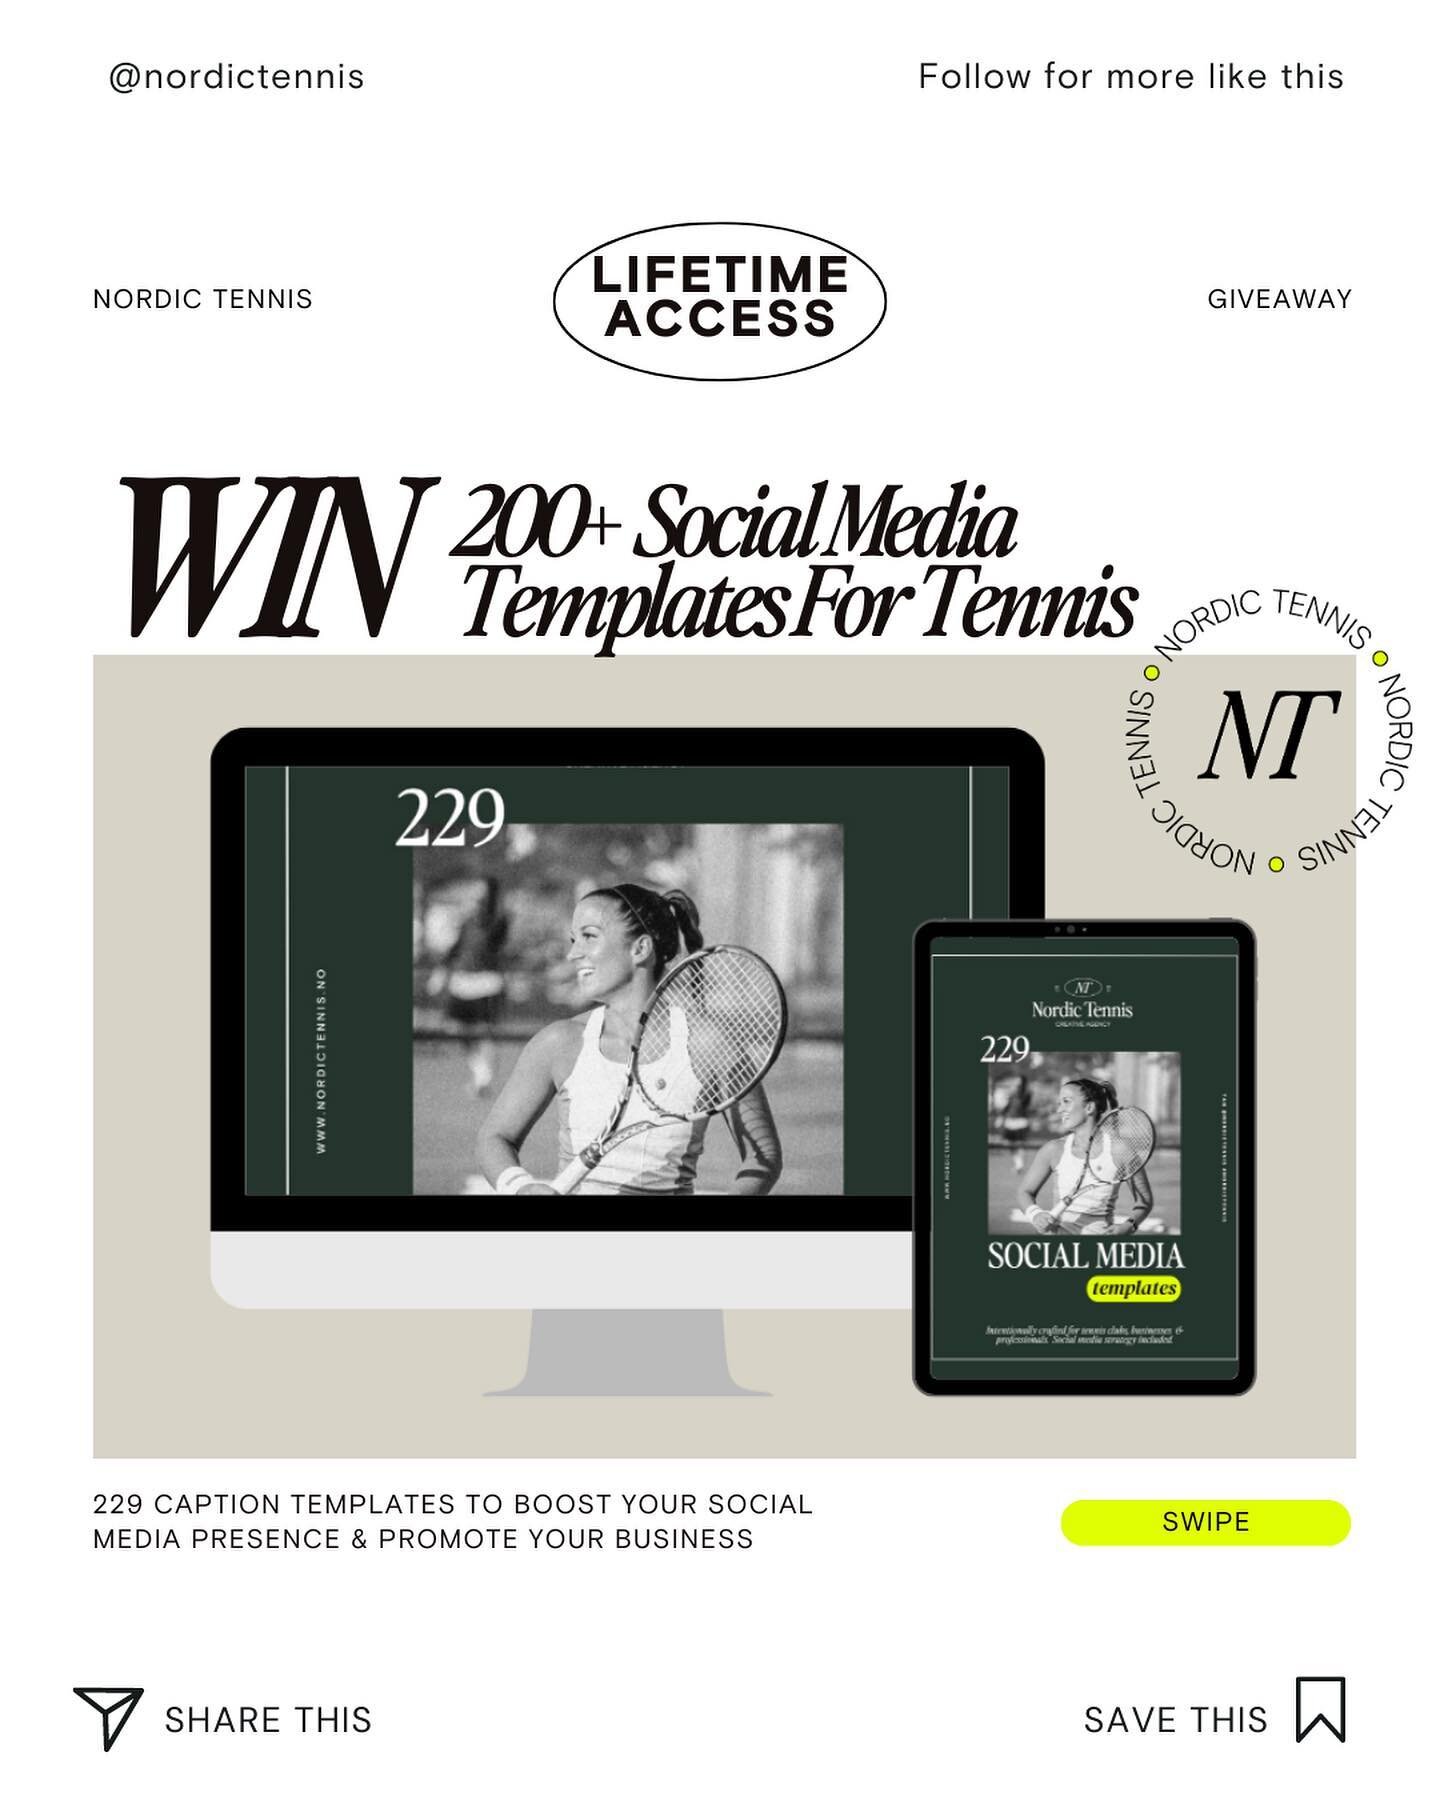 GIVEAWAY! 📣📣
Want to up your content game in 2023? Well, we have a treat for you! 

We&rsquo;re giving away lifetime access to 200+ social media caption templates to not one, but TWO lucky winners! 🎉 

To enter:
🎾 Follow @nordictennis
🎾 Tag a fr